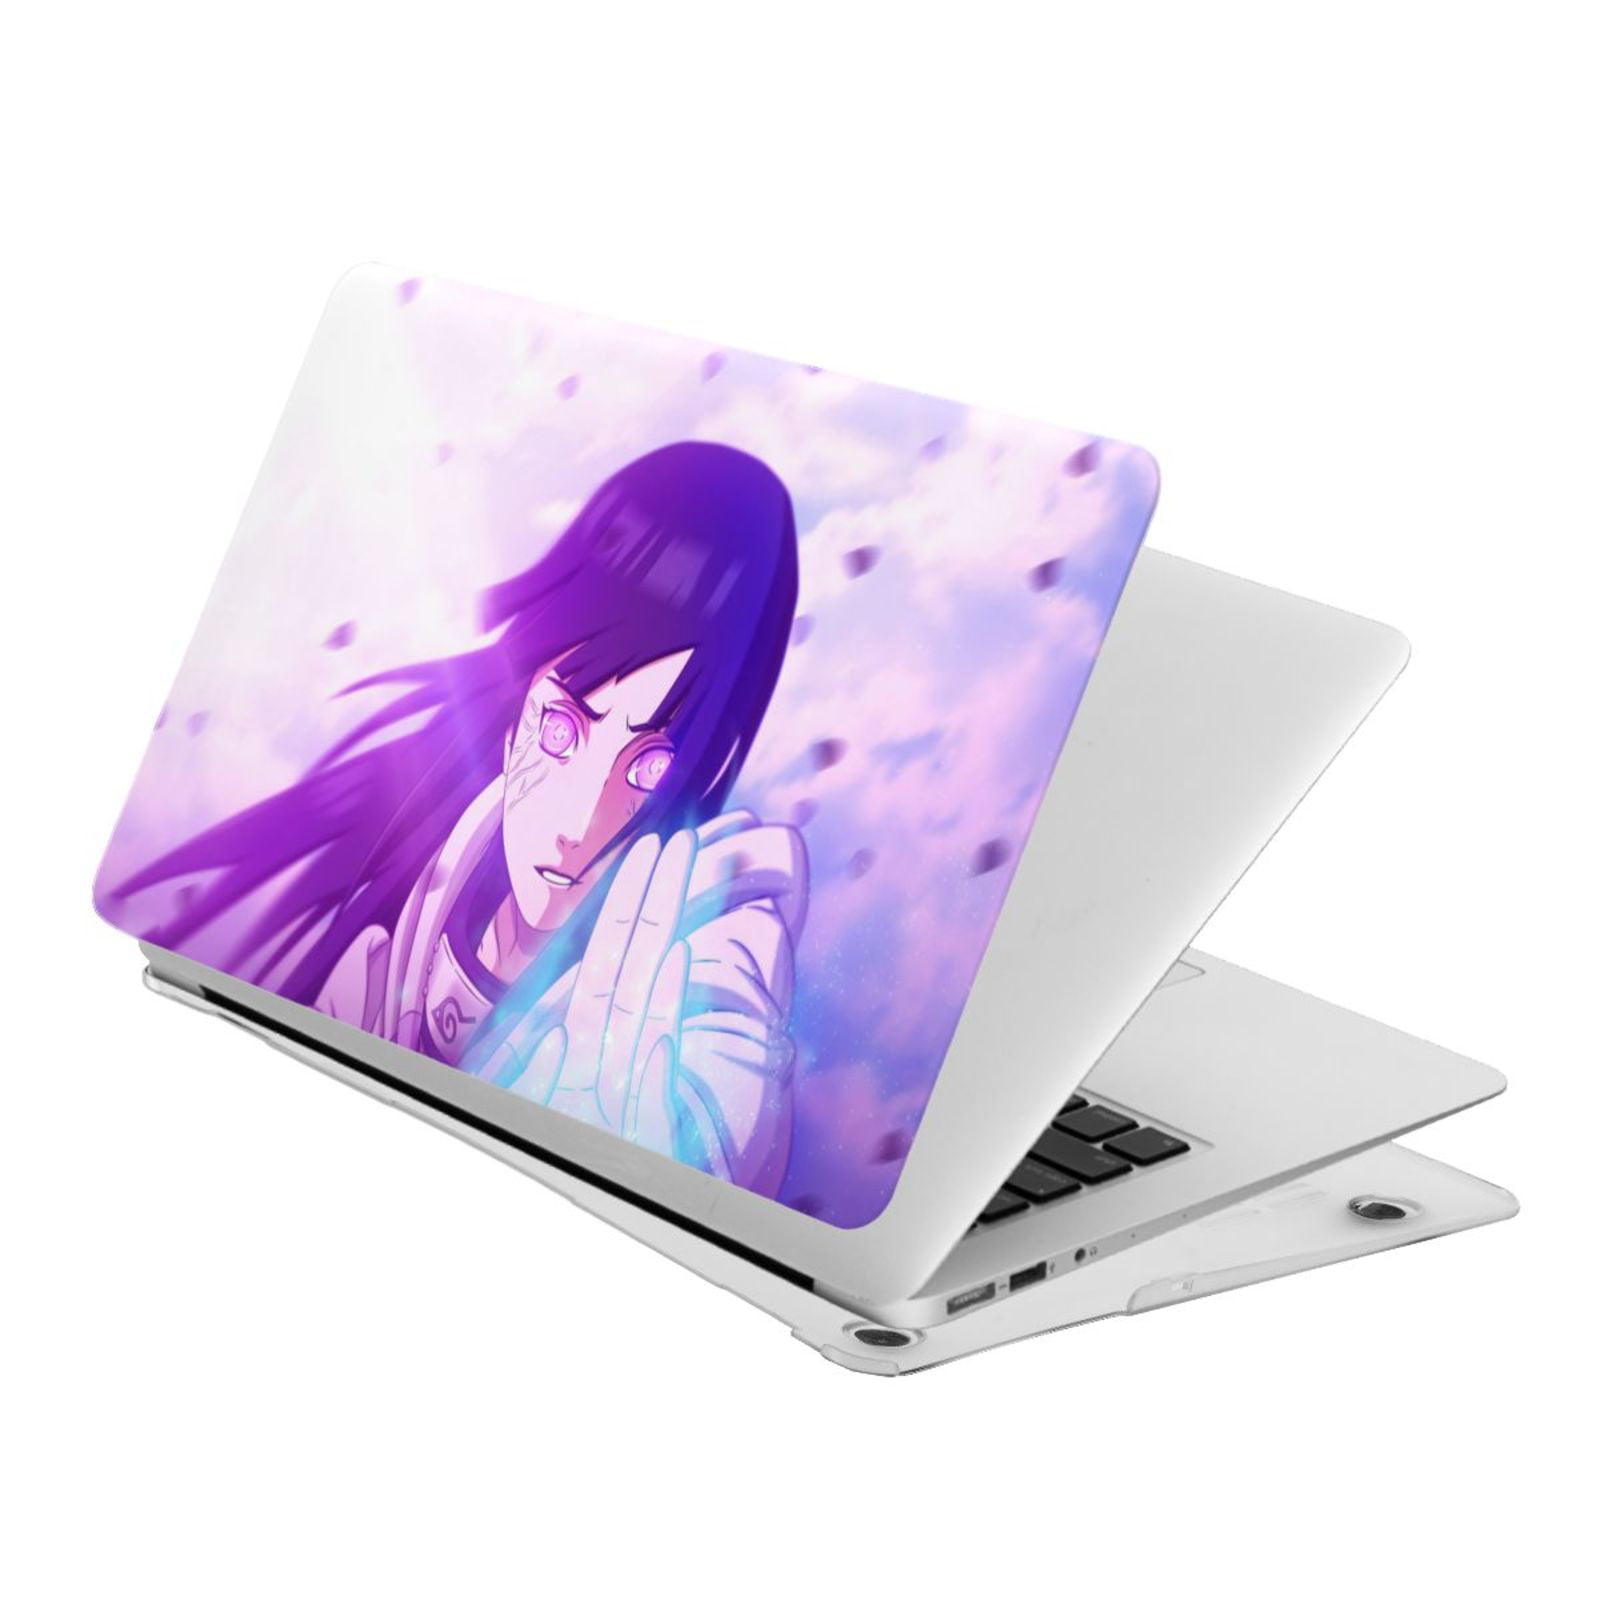 Stained Glass Tablet Bag Trendy Full Printed Laptop Computer Bag Dust-Proof Neoprene Fabric Laptop Computer Bag for Girls Boys White 13inch